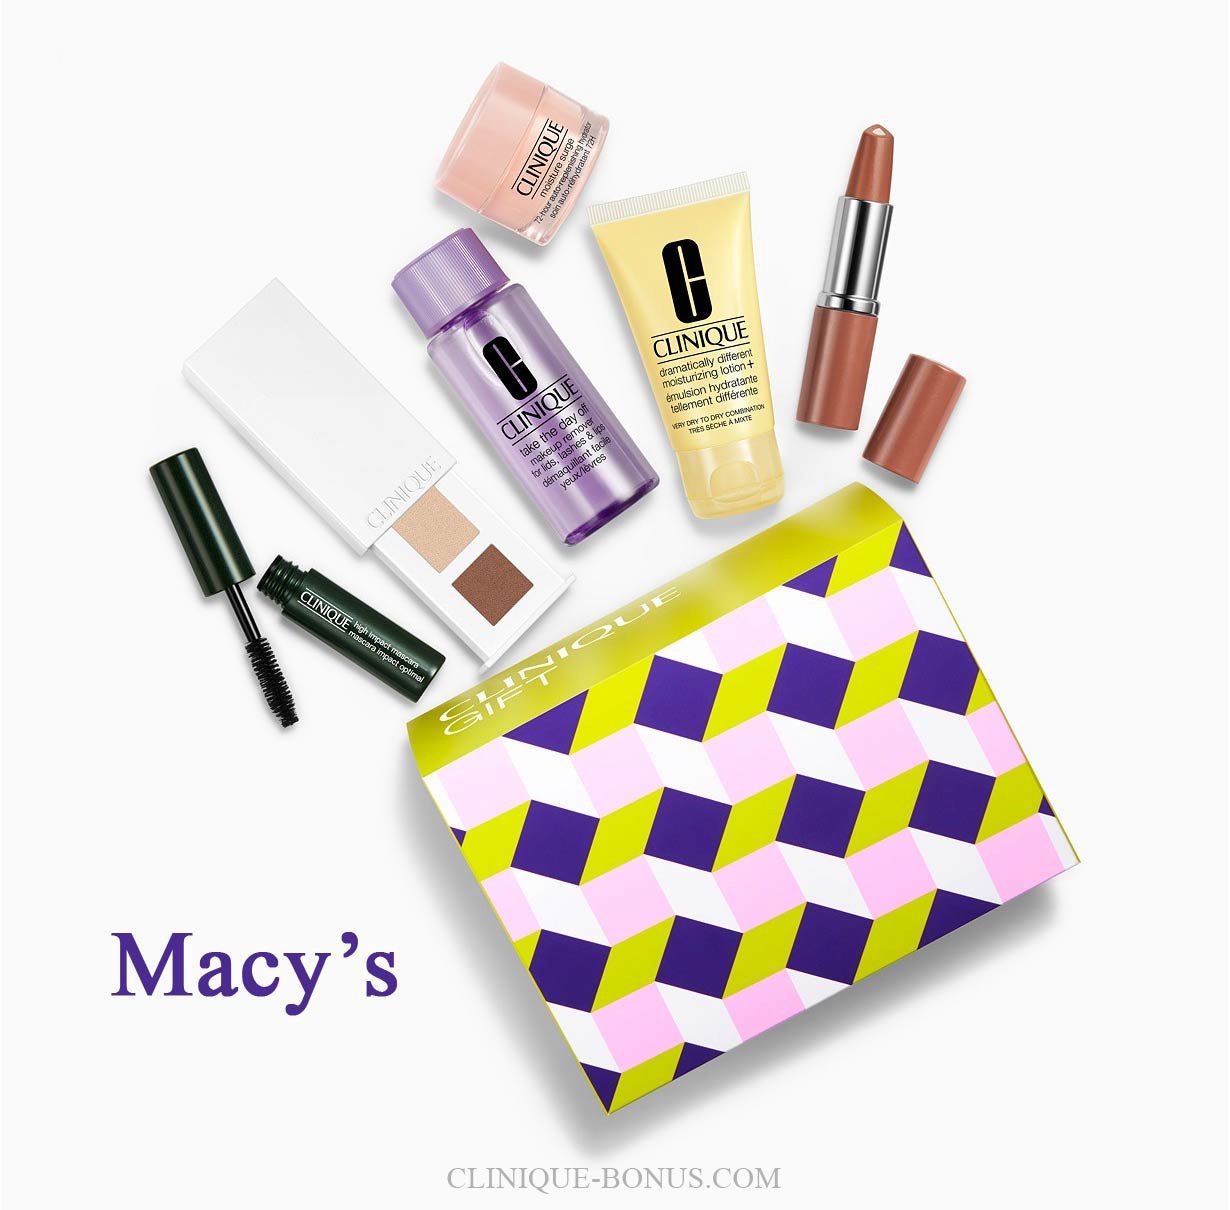 Free Clinique gifts with purchase at Macy's 2021